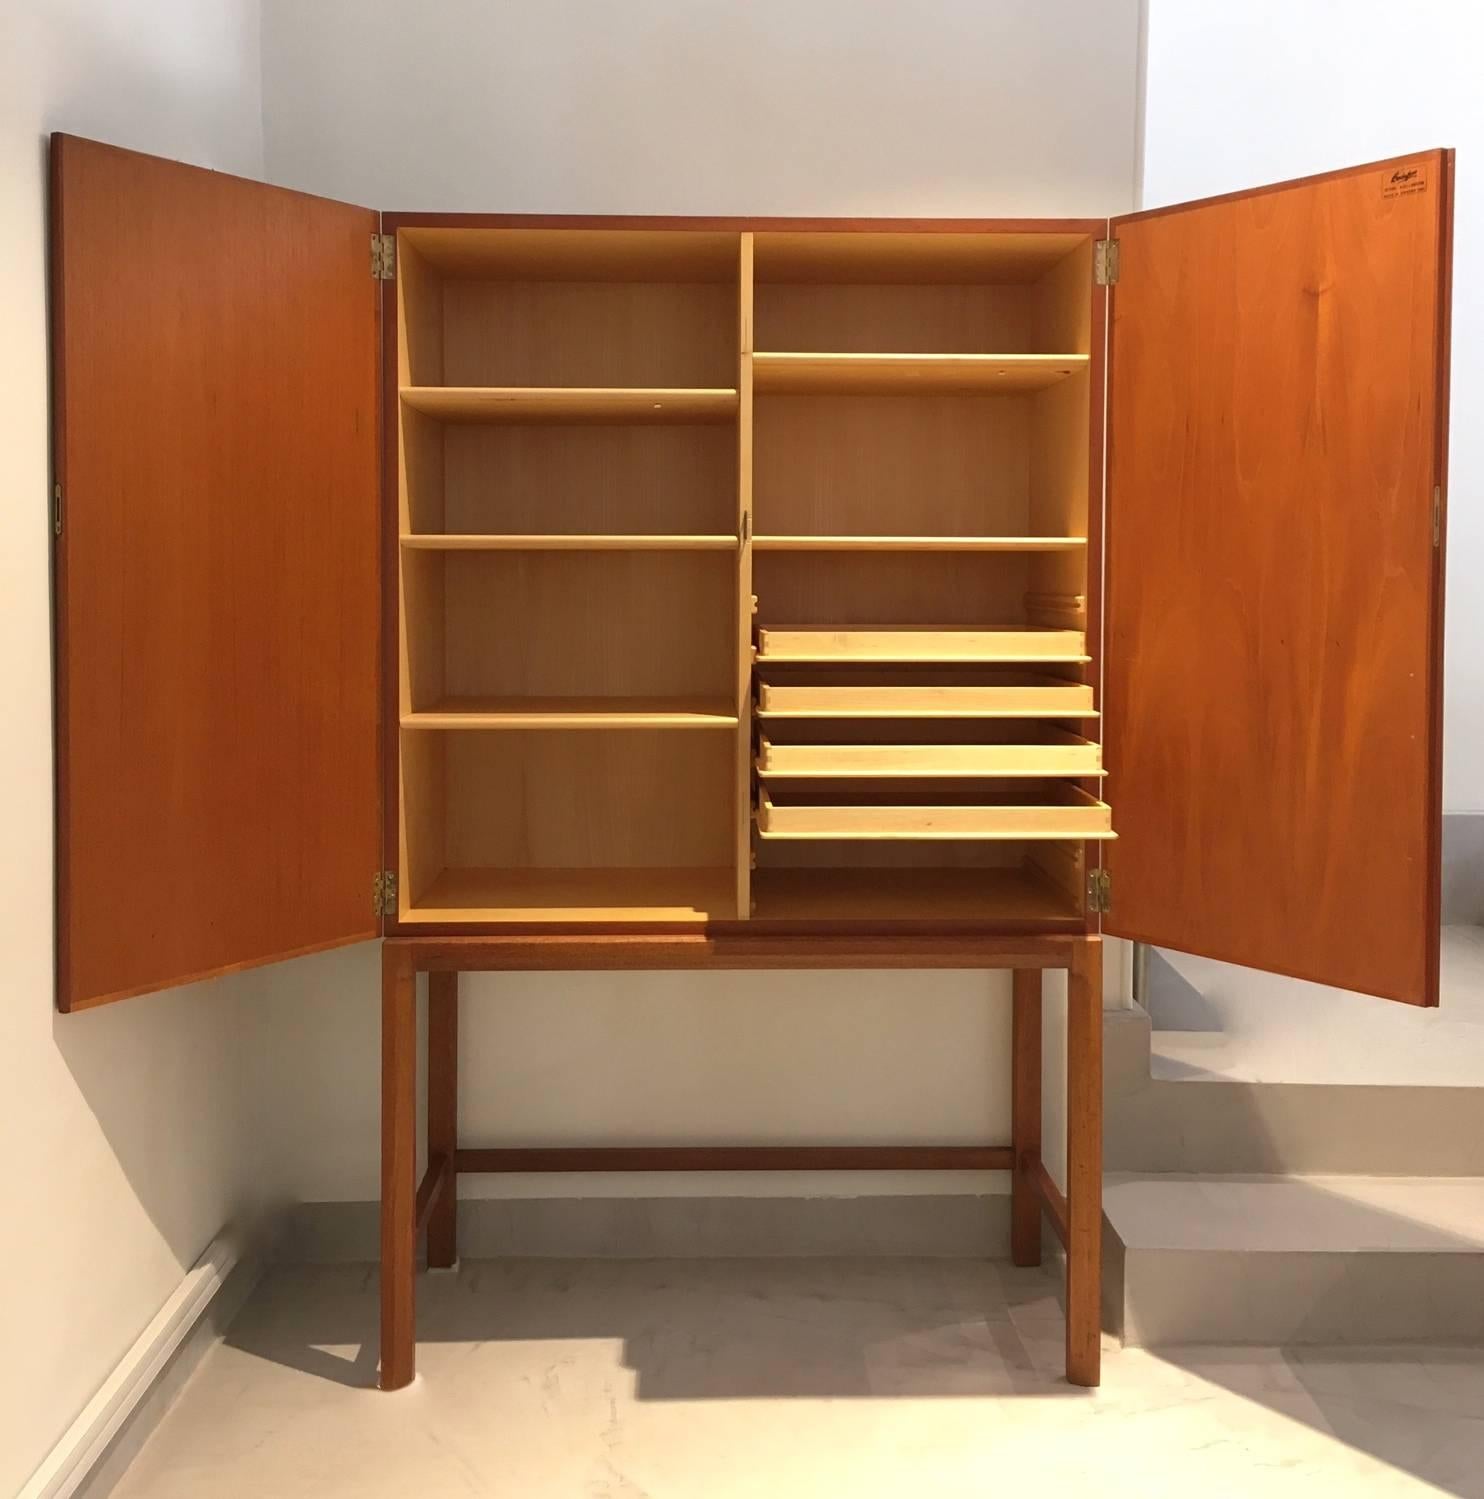 Rare teak cabinet designed by Axel Larsson for Bodafors, Sweden in 1961. Interior made of birch. Storage featuring shelves and pull-out trays. Ideal for a dining room. Recently restored very good condition, only minor darker stripe on one side. 